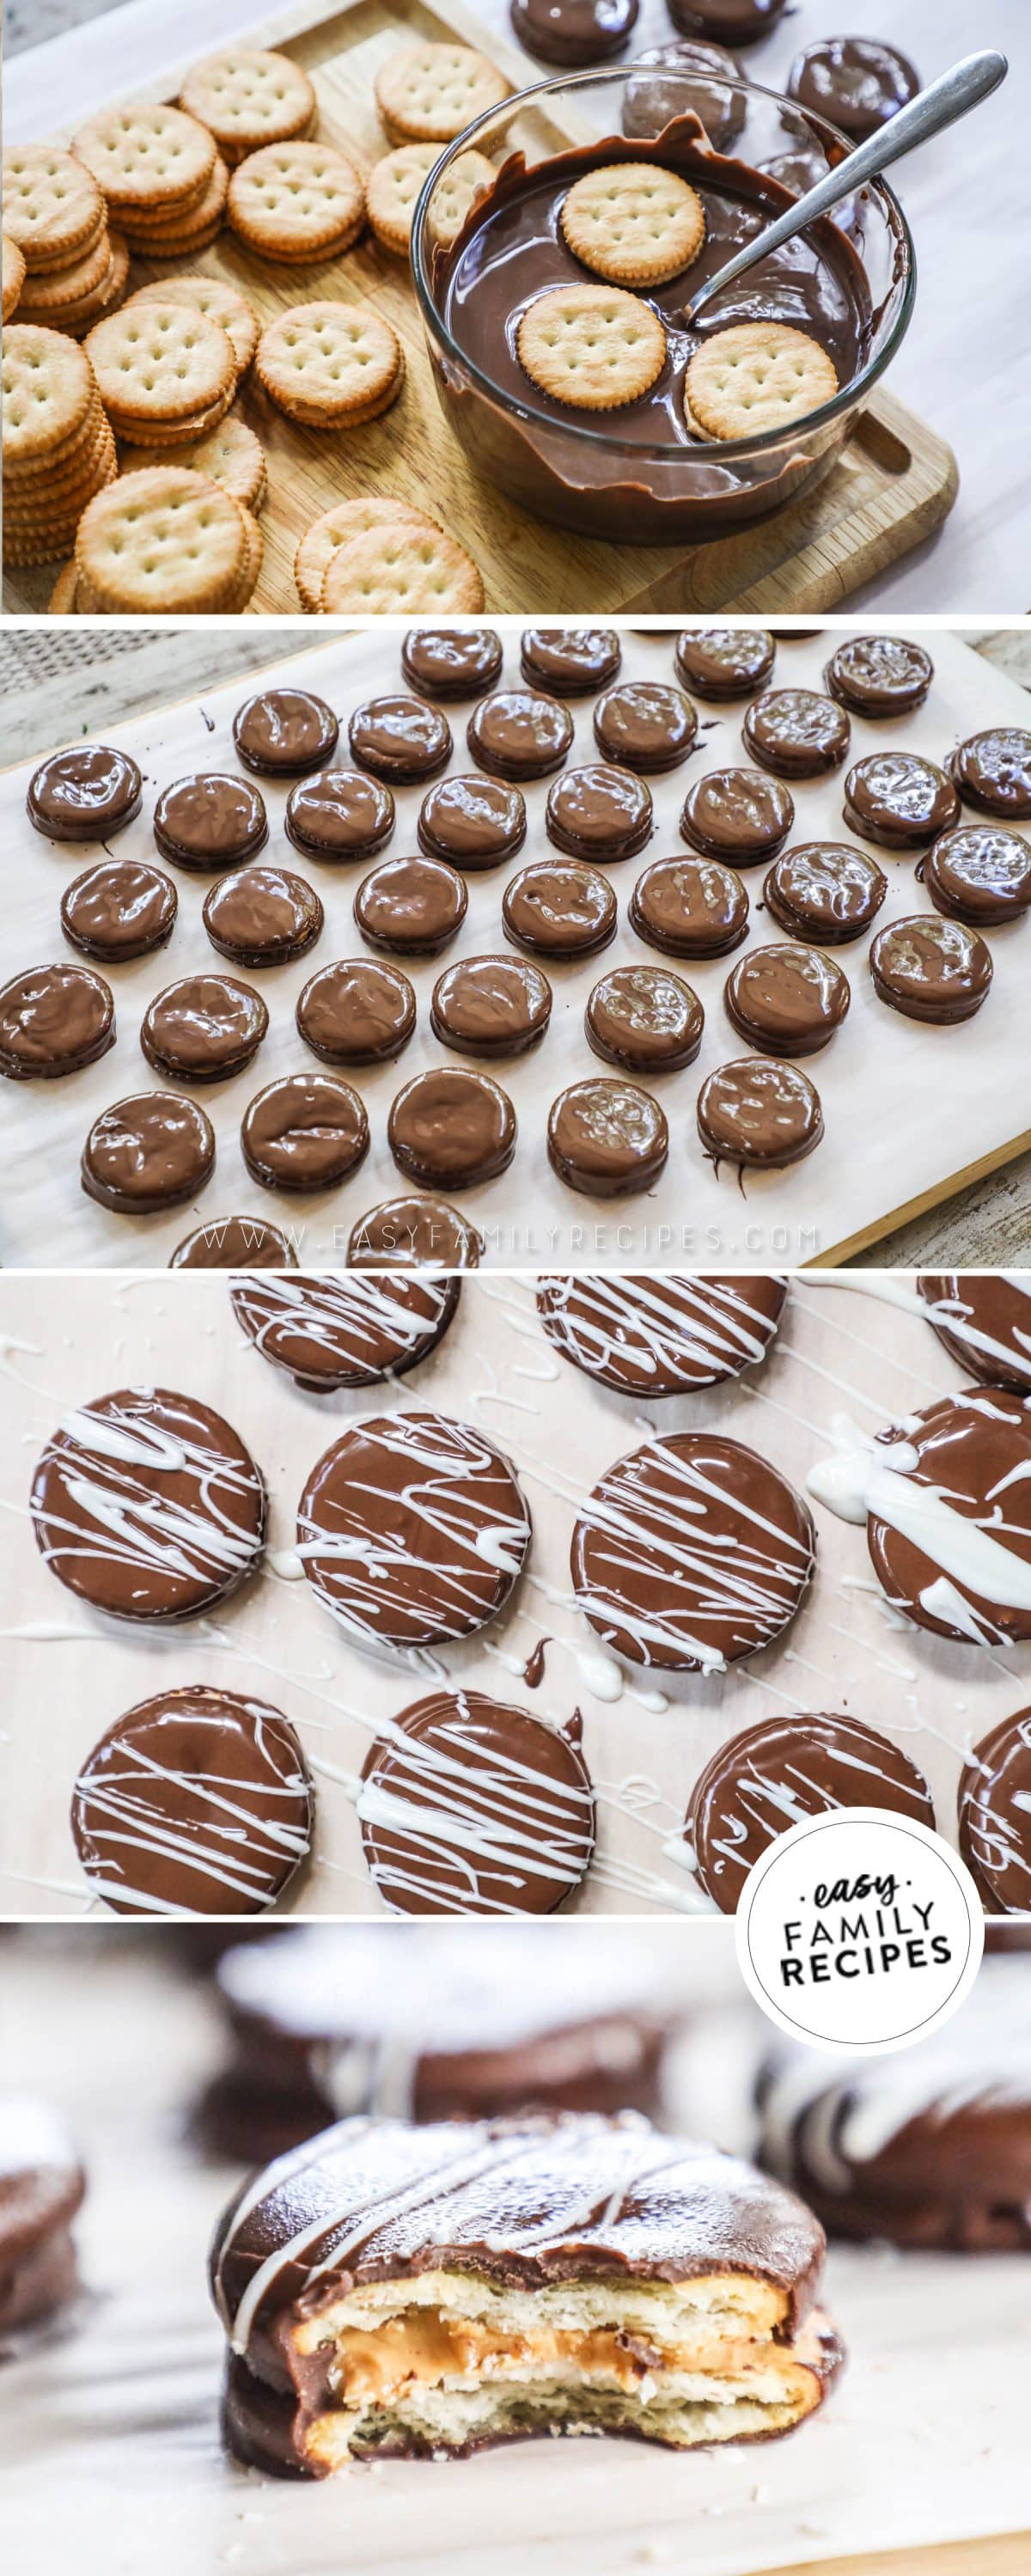 Steps to make ritz crackers covered in chocolate step 1 fill crackers with peanut butter step 2 dip in chocolate step 3 top with festive decorations step 4 let harden and enjoy!